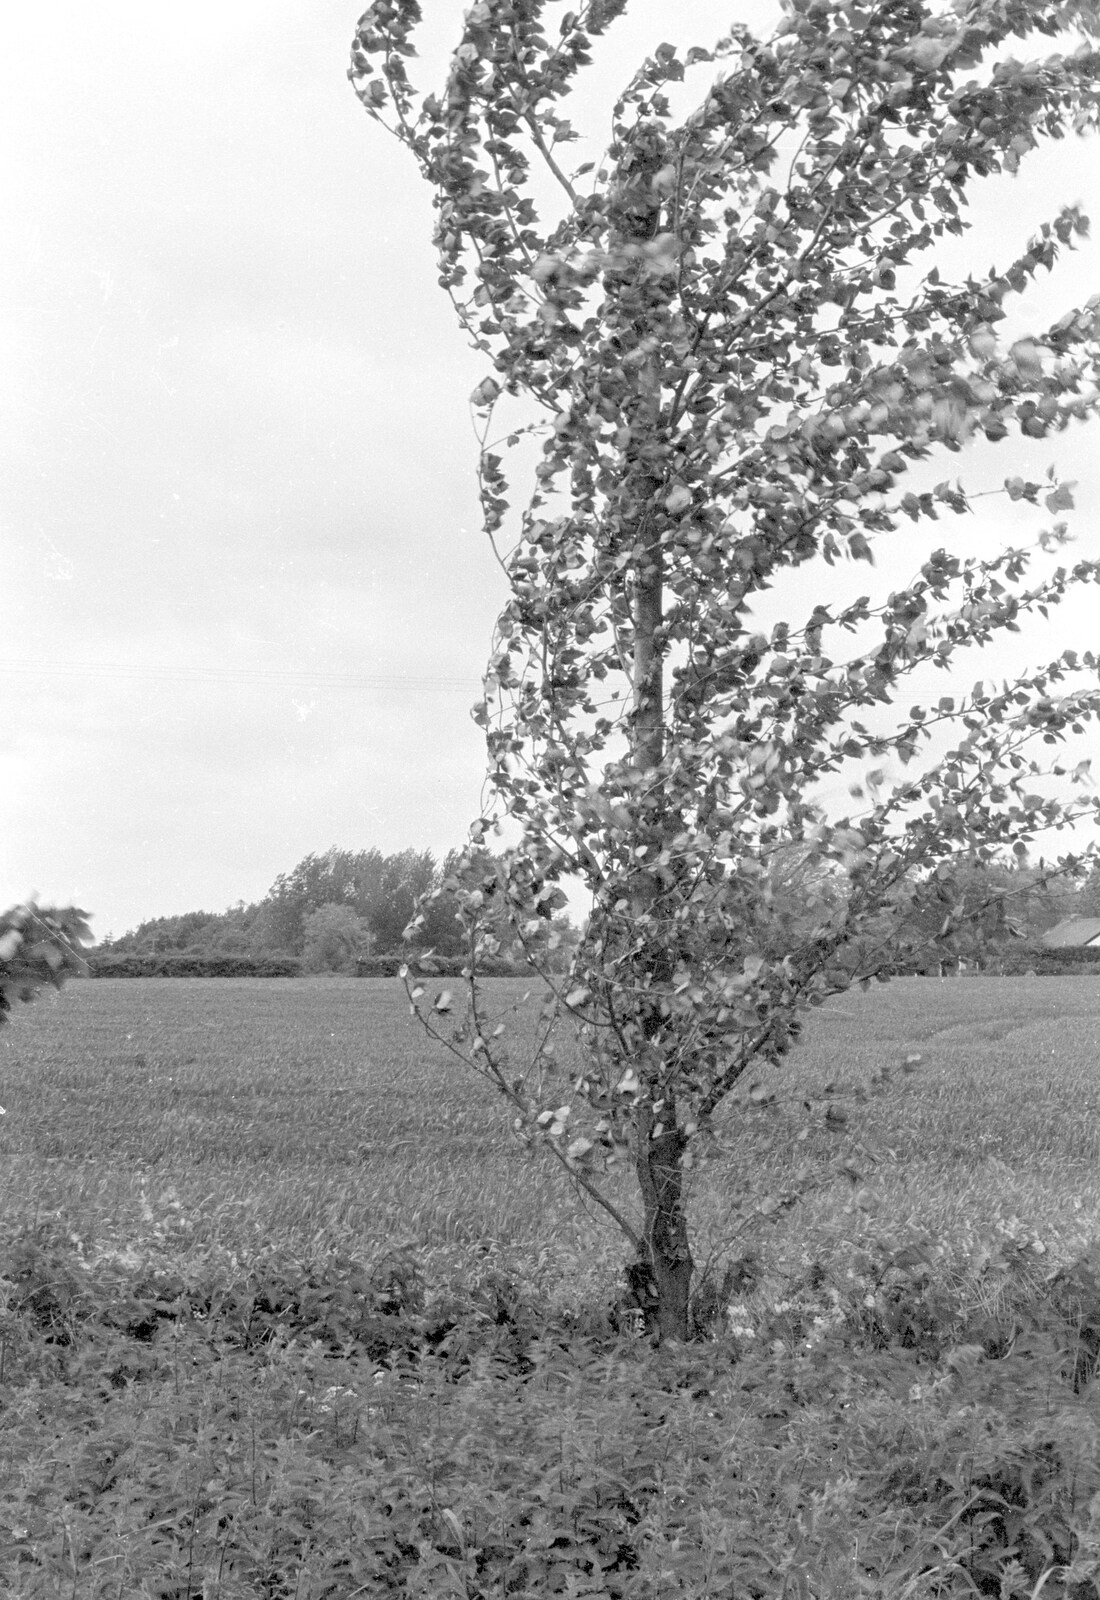 A tree by the allotment from The Royal Norfolk Show, Costessey Showground, Norwich - June 20th 1994